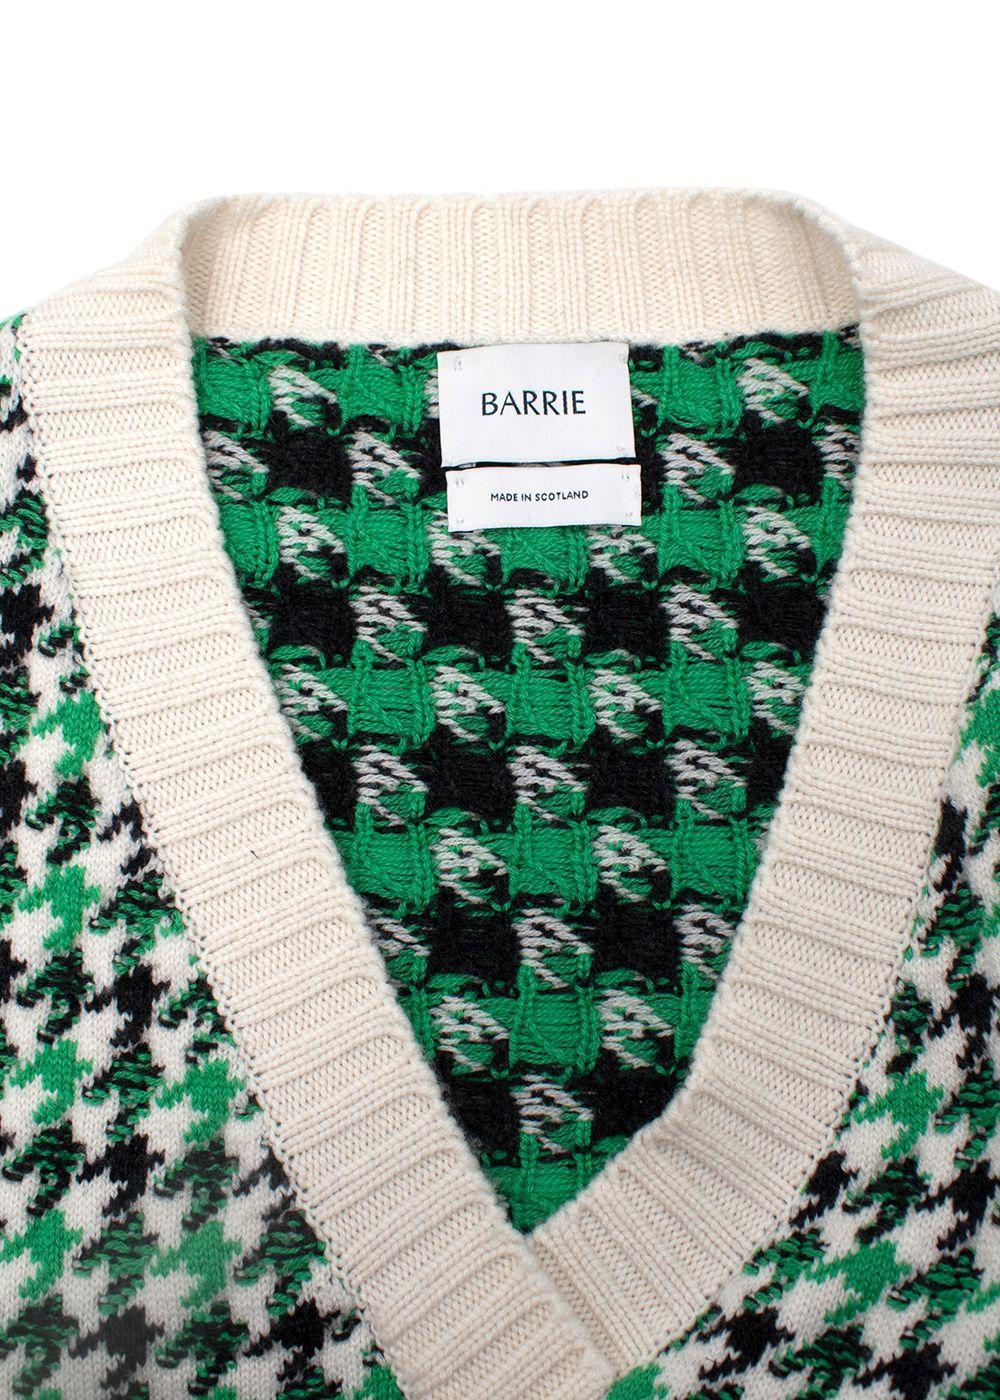 Gray Barrie Green, White & Black Knitted Vest & Trousers - US 4/6 For Sale